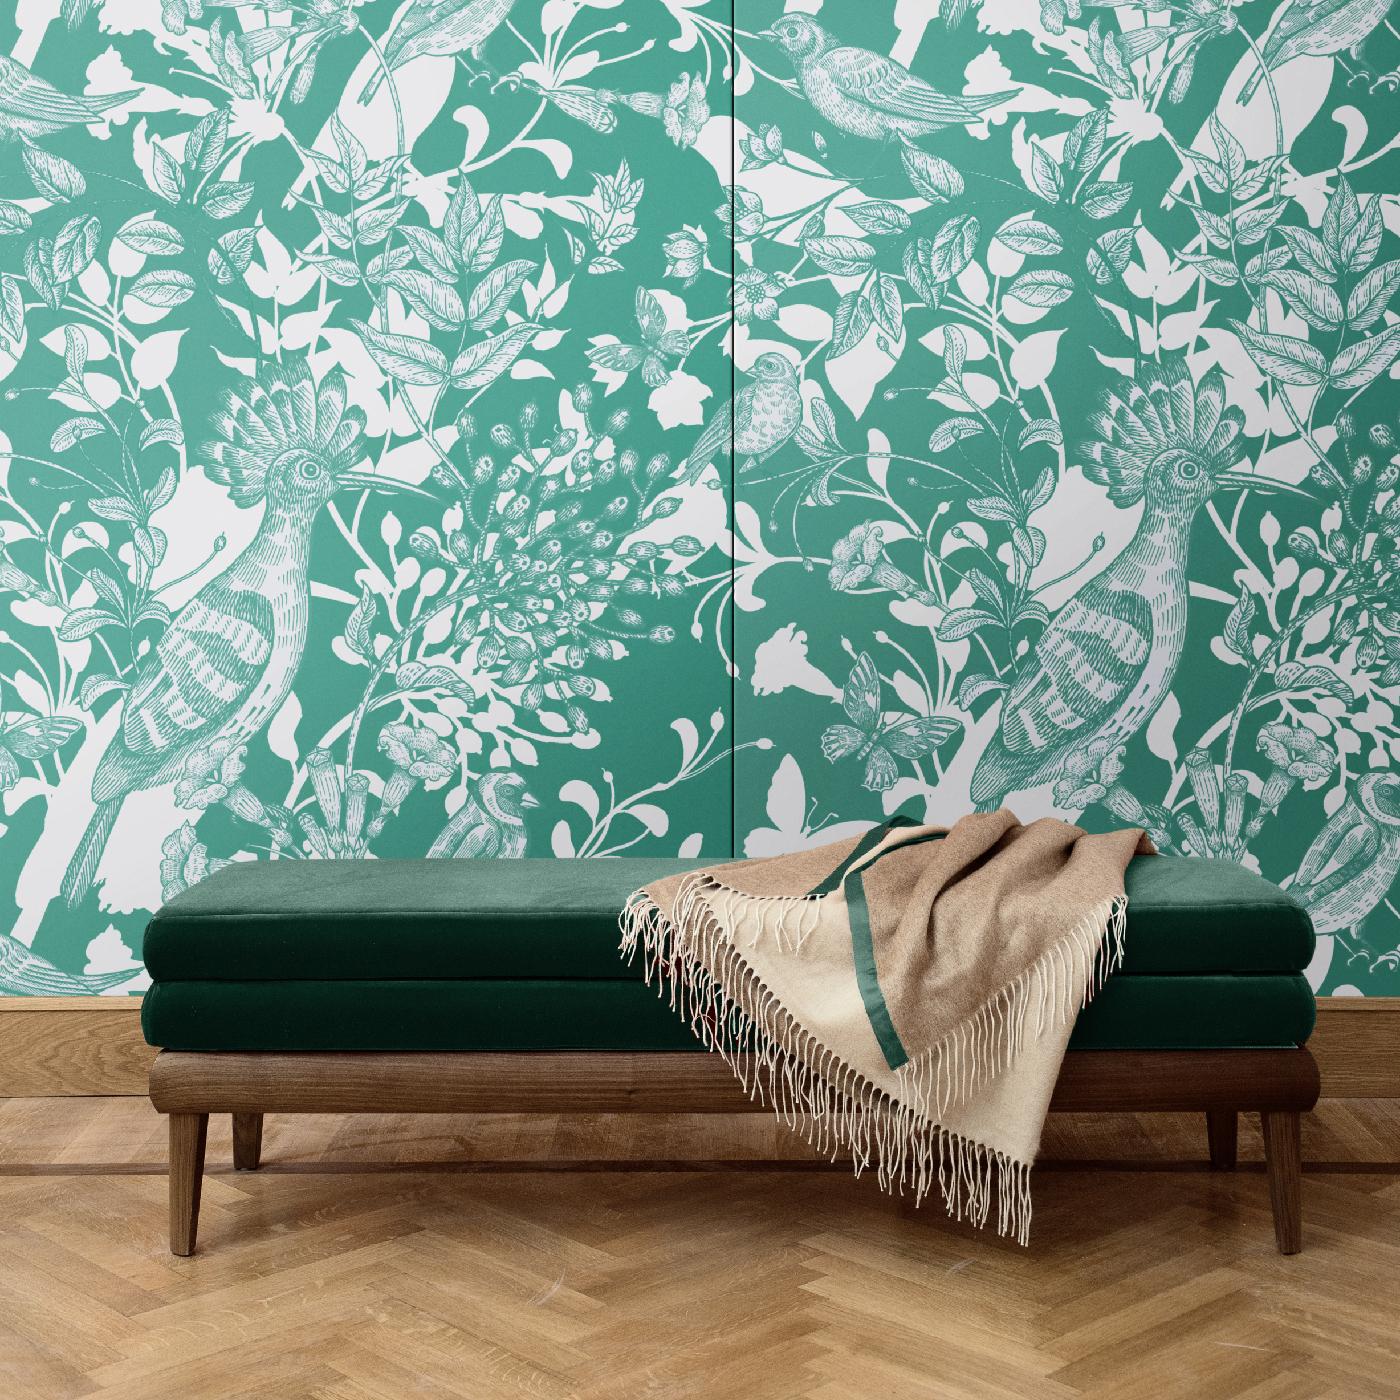 In this mesmerizing decoration, a scene with European birds, flying butterflies, and delicate flowers is exquisitely depicted in green and grey. Of strong visual impact, this wall covering will be eye-catching in any interior, adding a dramatic